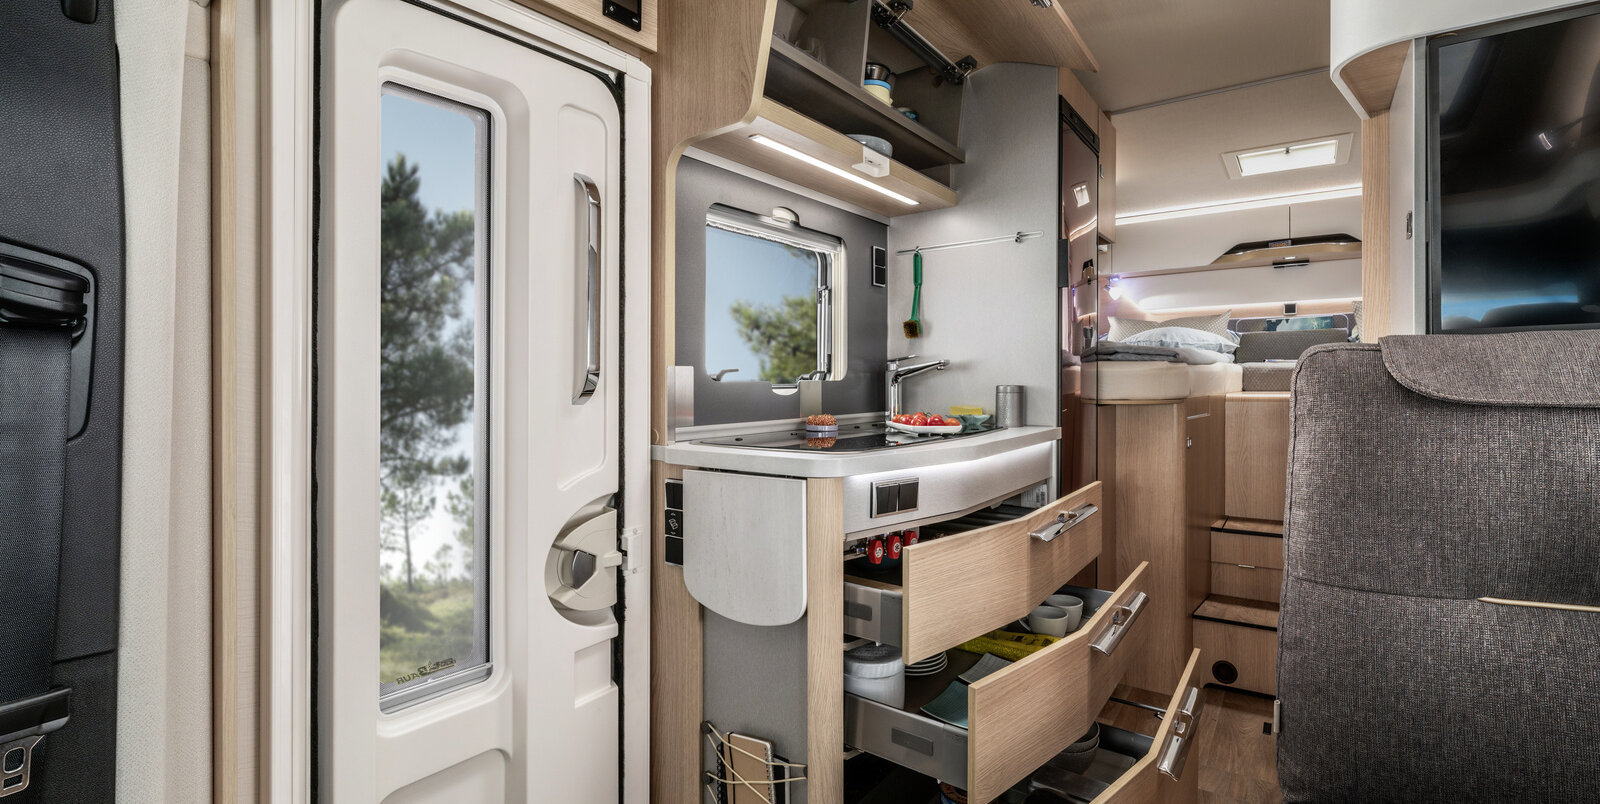 Opened drawers and overhead storage cupboards filled with kitchen utensils in the kitchen of the HYMER ModernComfort